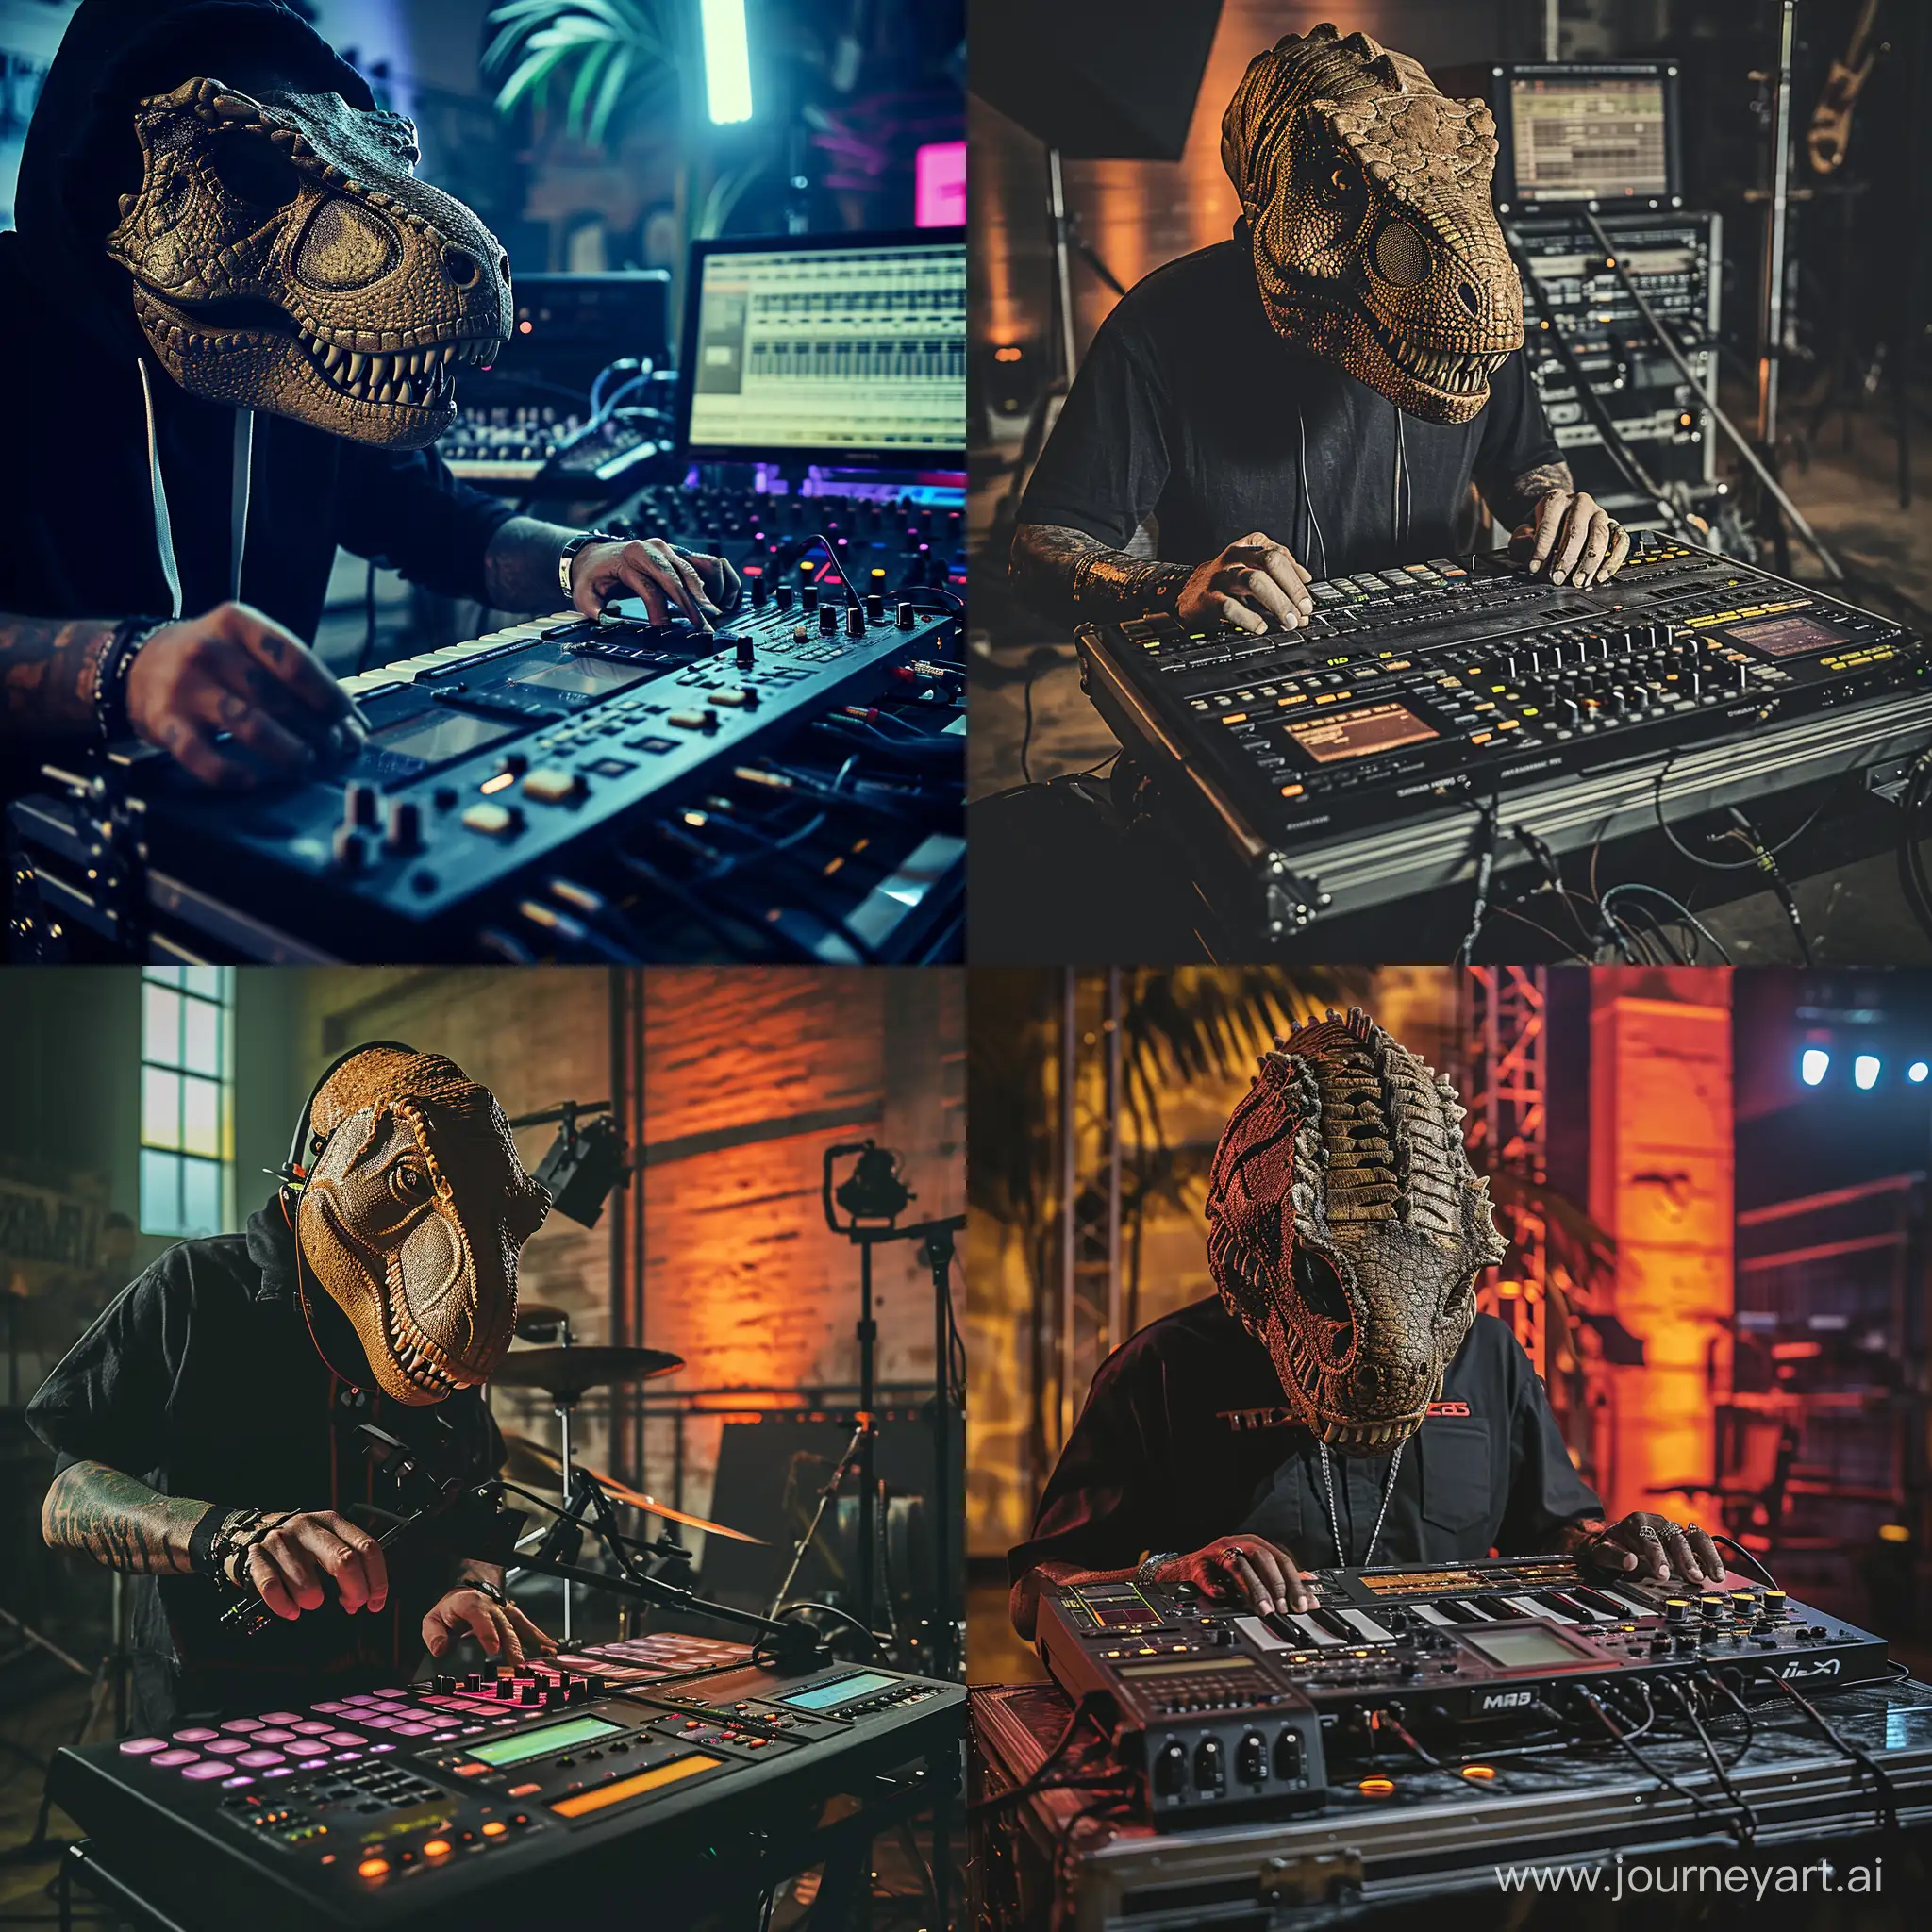 TRex-Masked-Music-Producer-with-MPC-Drum-Controller-in-Gritty-Studio-Setting